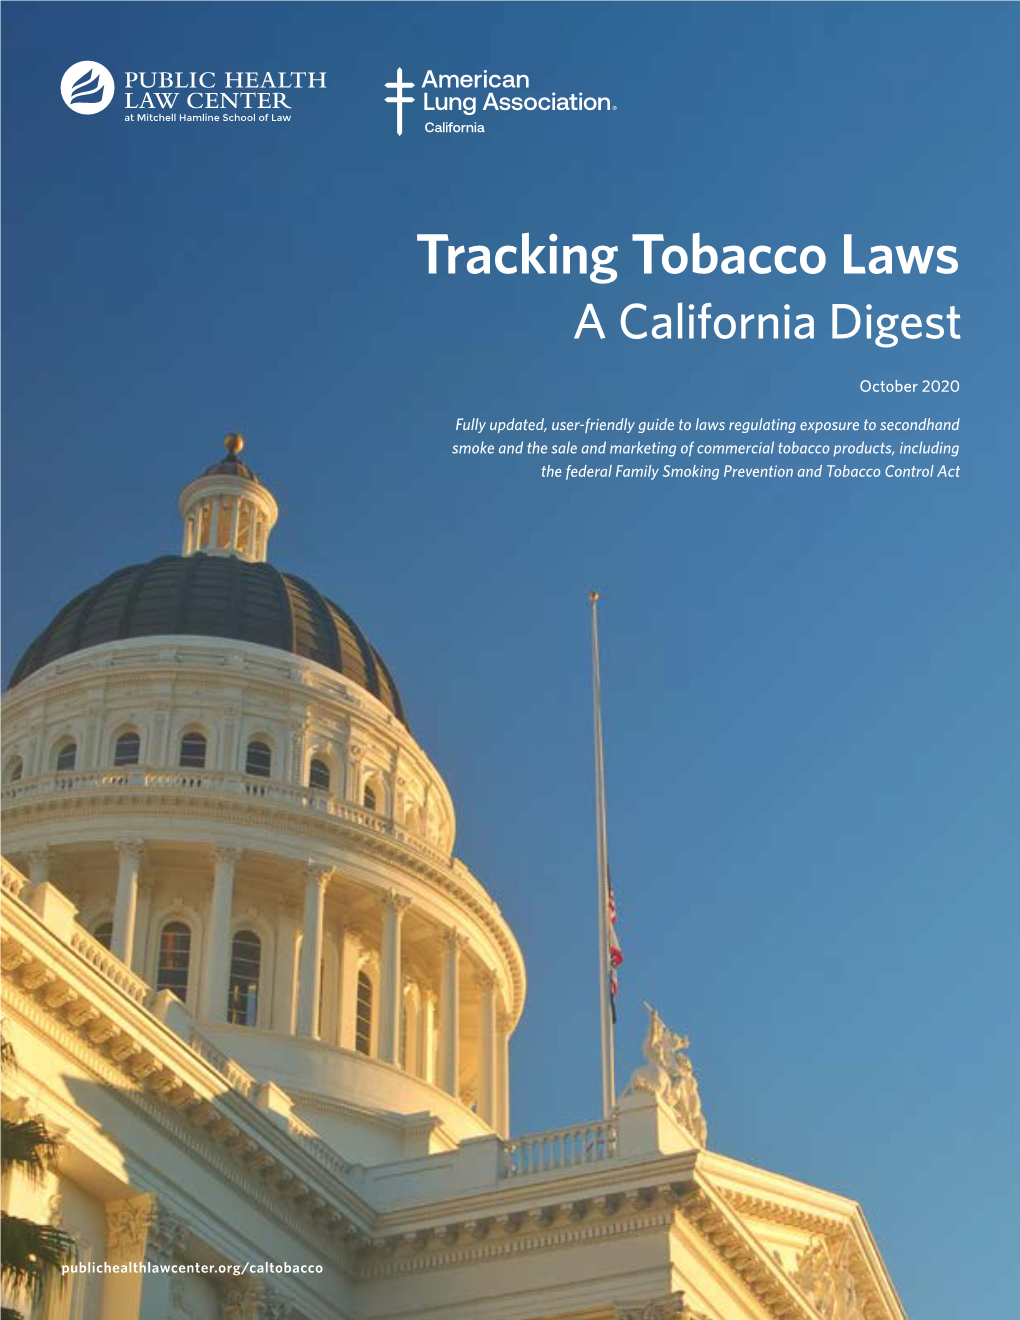 Tracking Tobacco Laws a California Digest